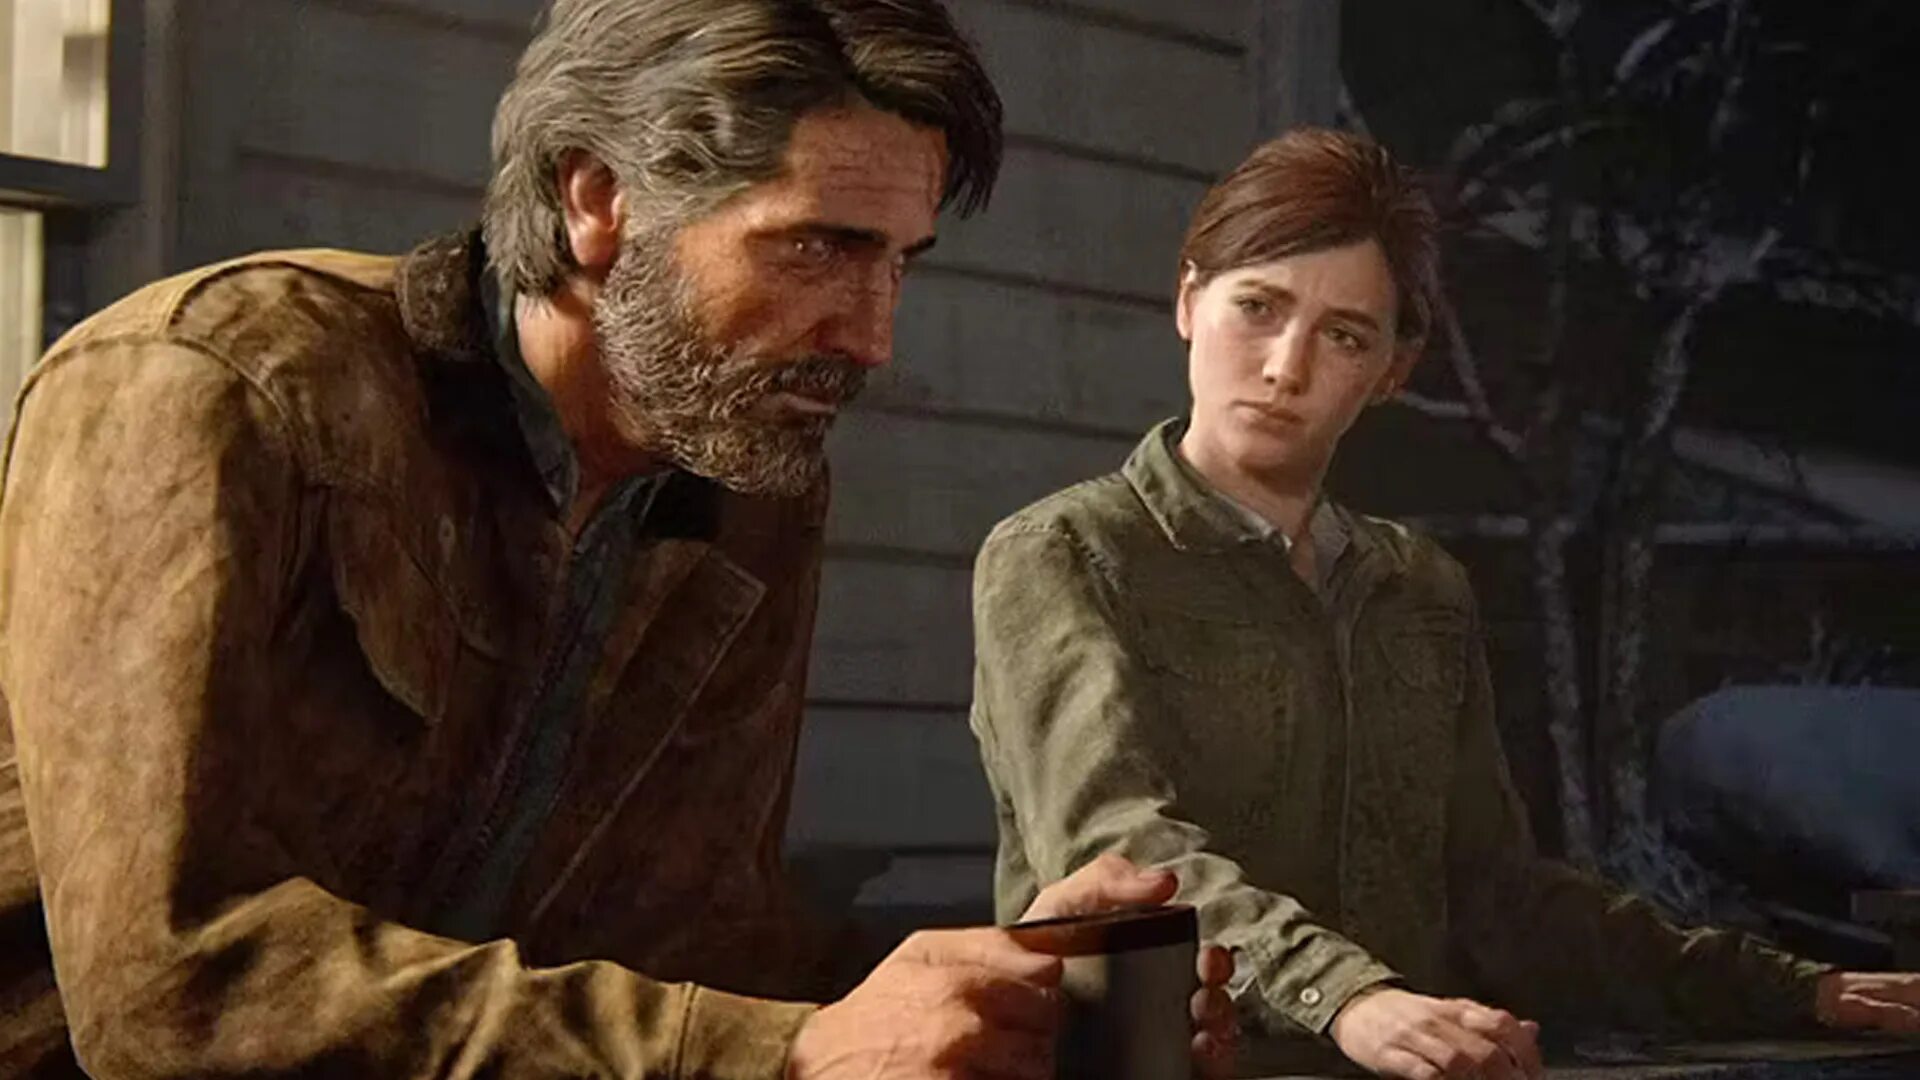 He gave us up. Джоэл the last of us 2. Джоэл the last of us. Элли и Джоэл из the last of us 2.